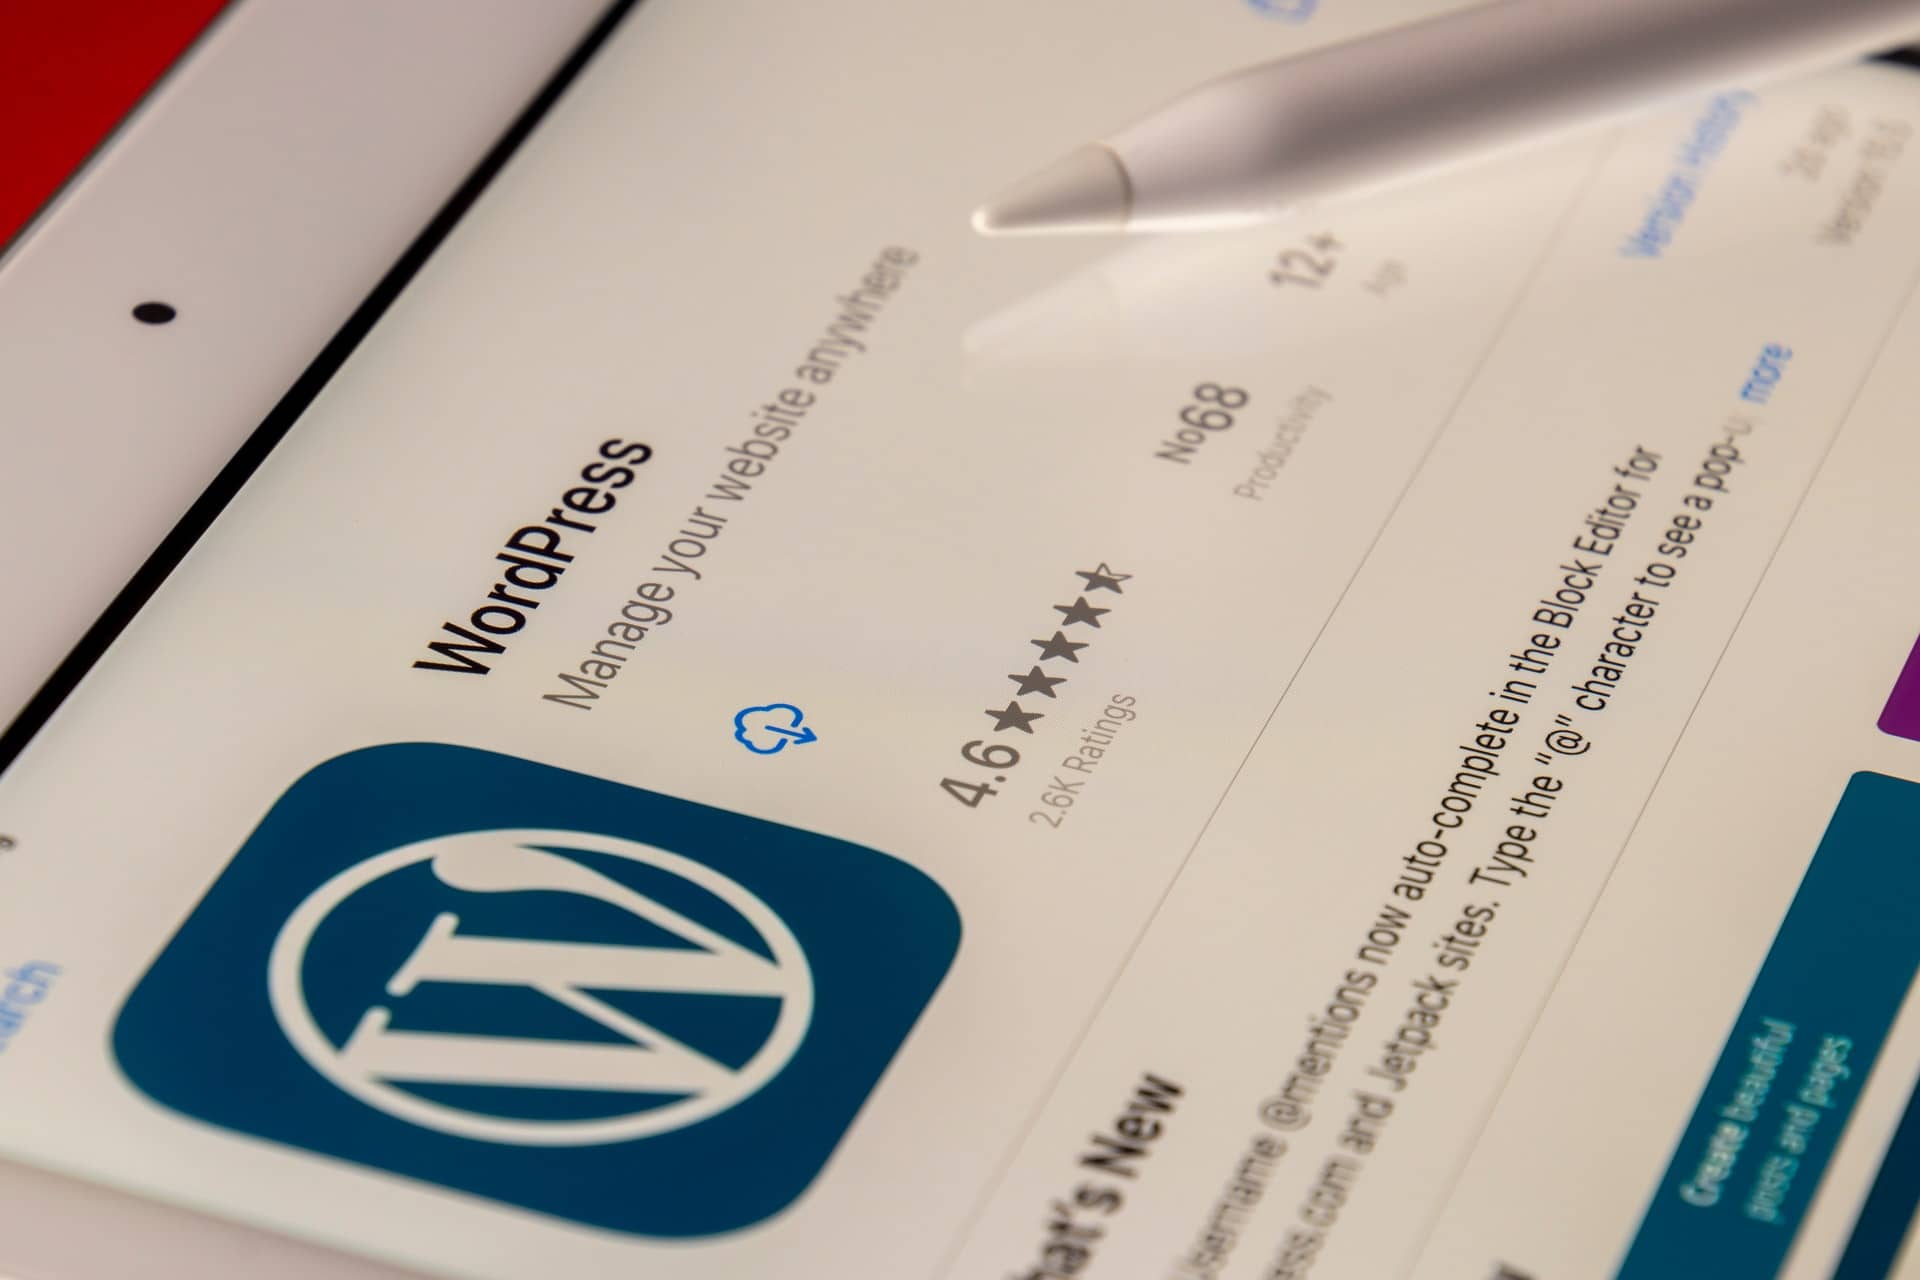 Create your blog now: from scratch to WordPress in less than 10 minutes!